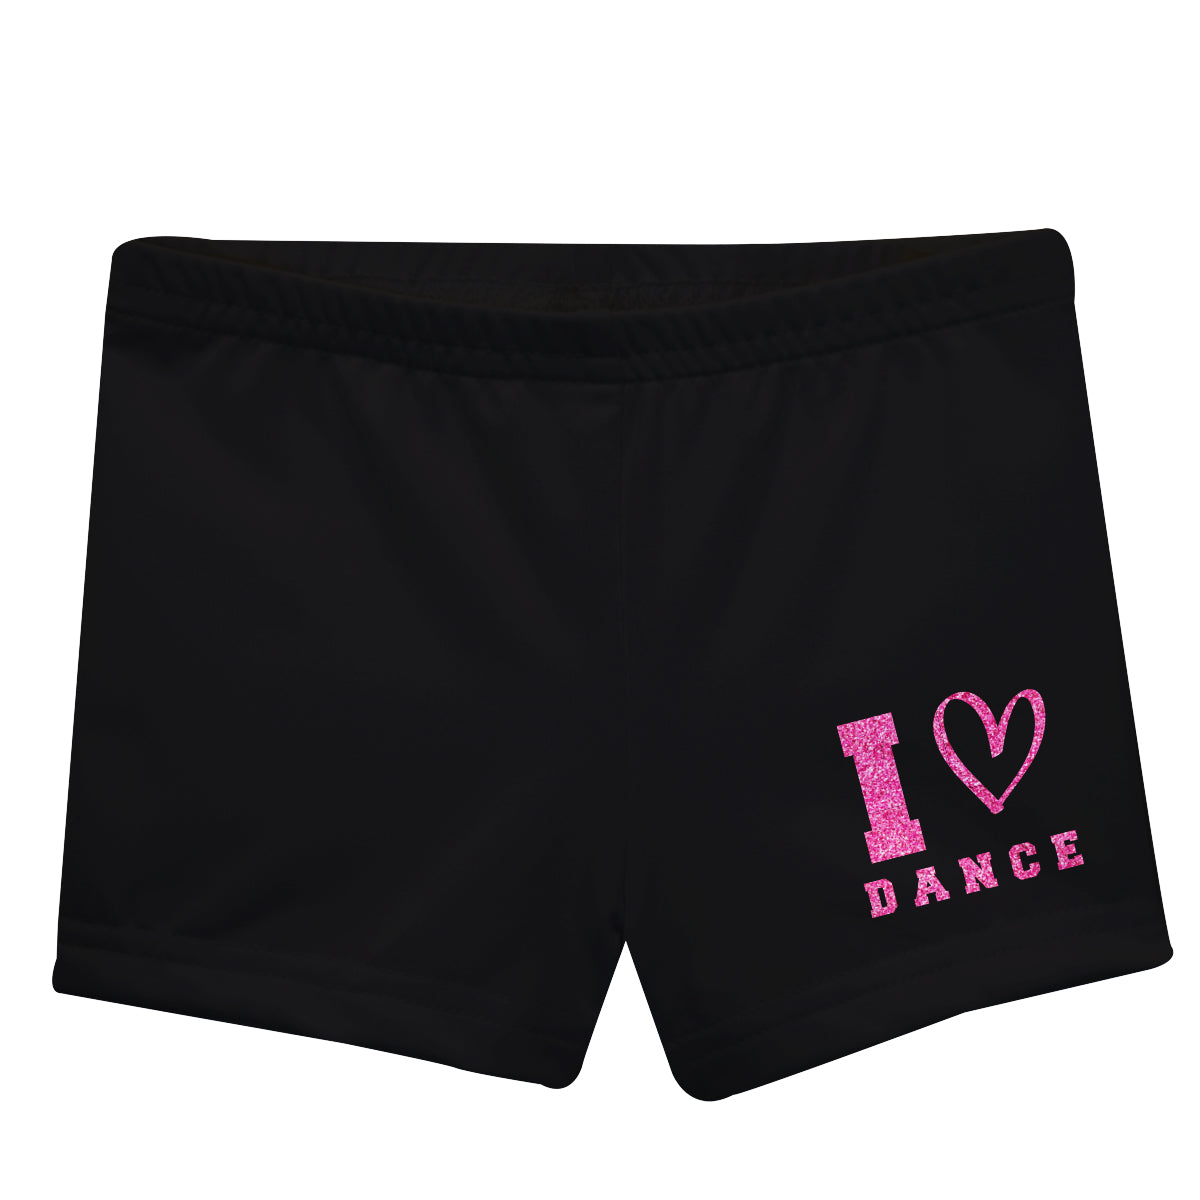 Black and pink 'I love dance' girls dance shorts - Wimziy&Co.